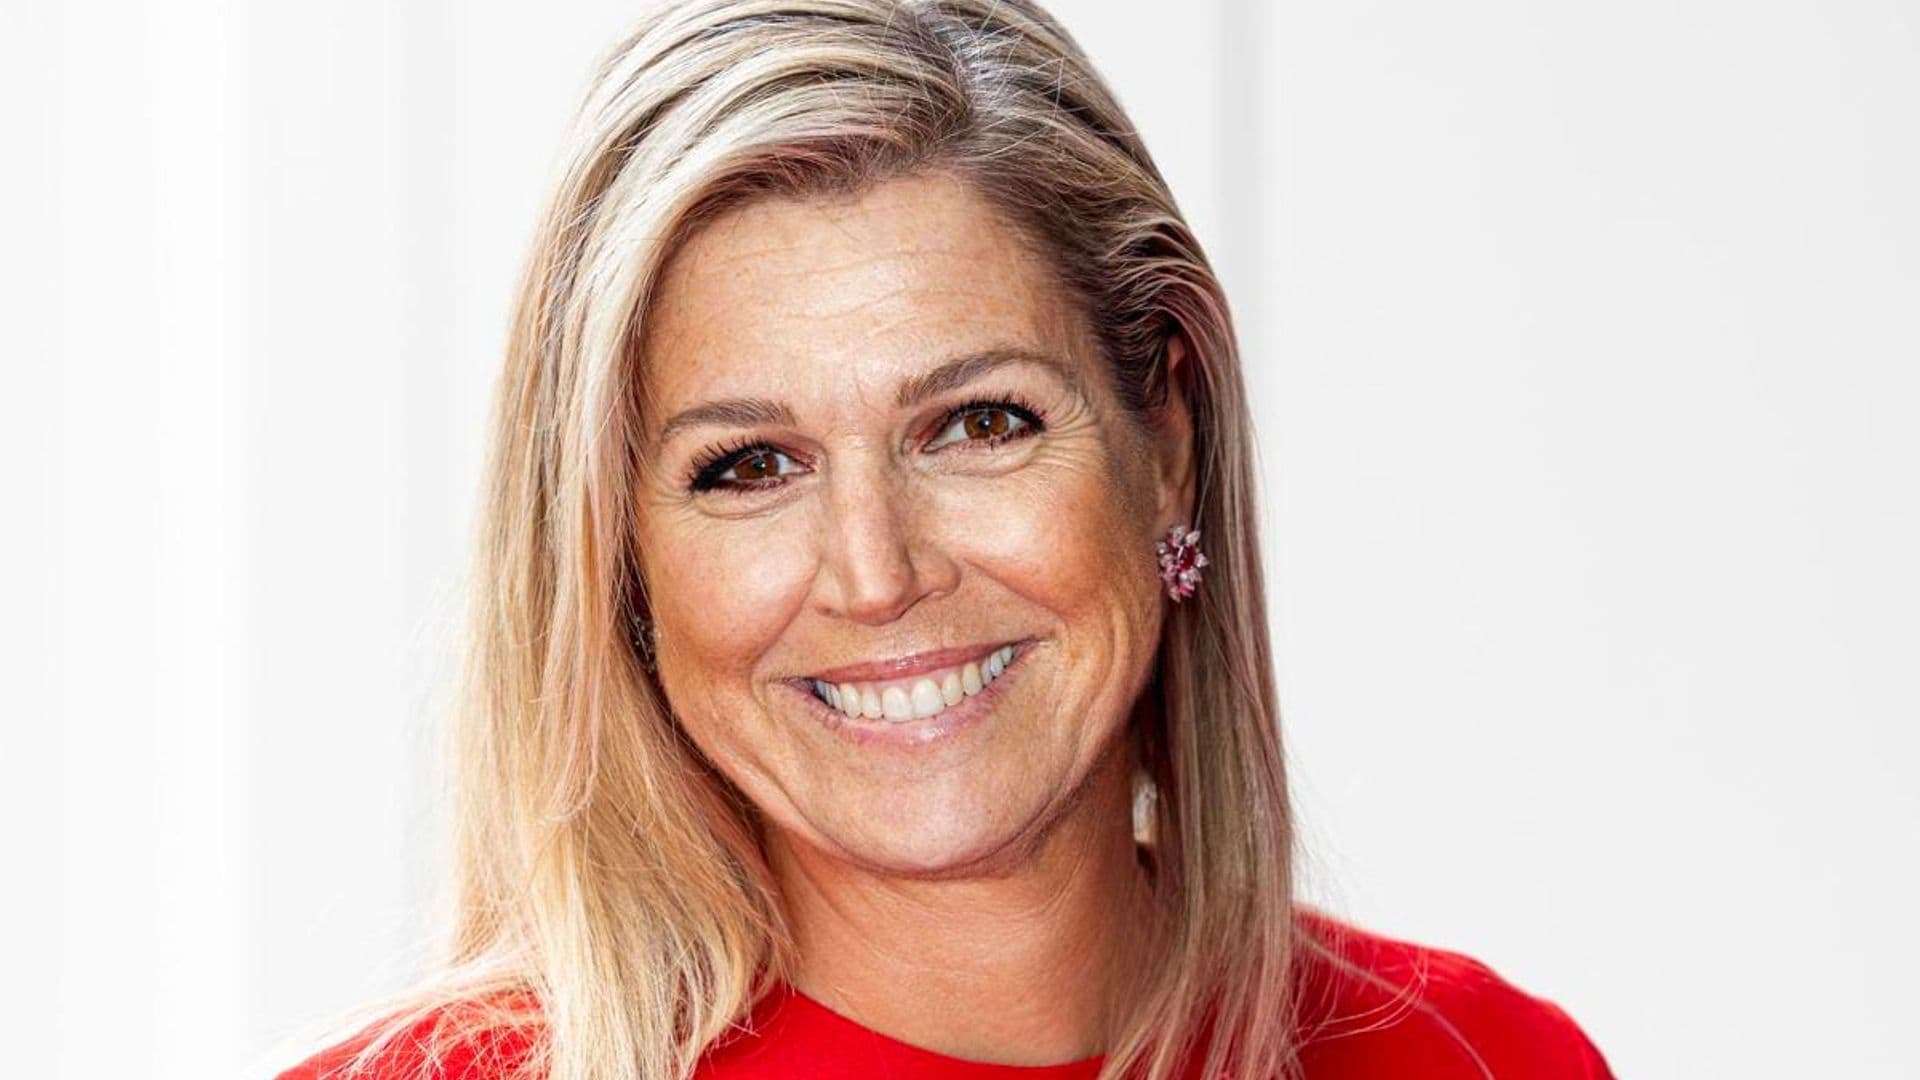 See Queen Maxima pose for a photo with a hedgehog